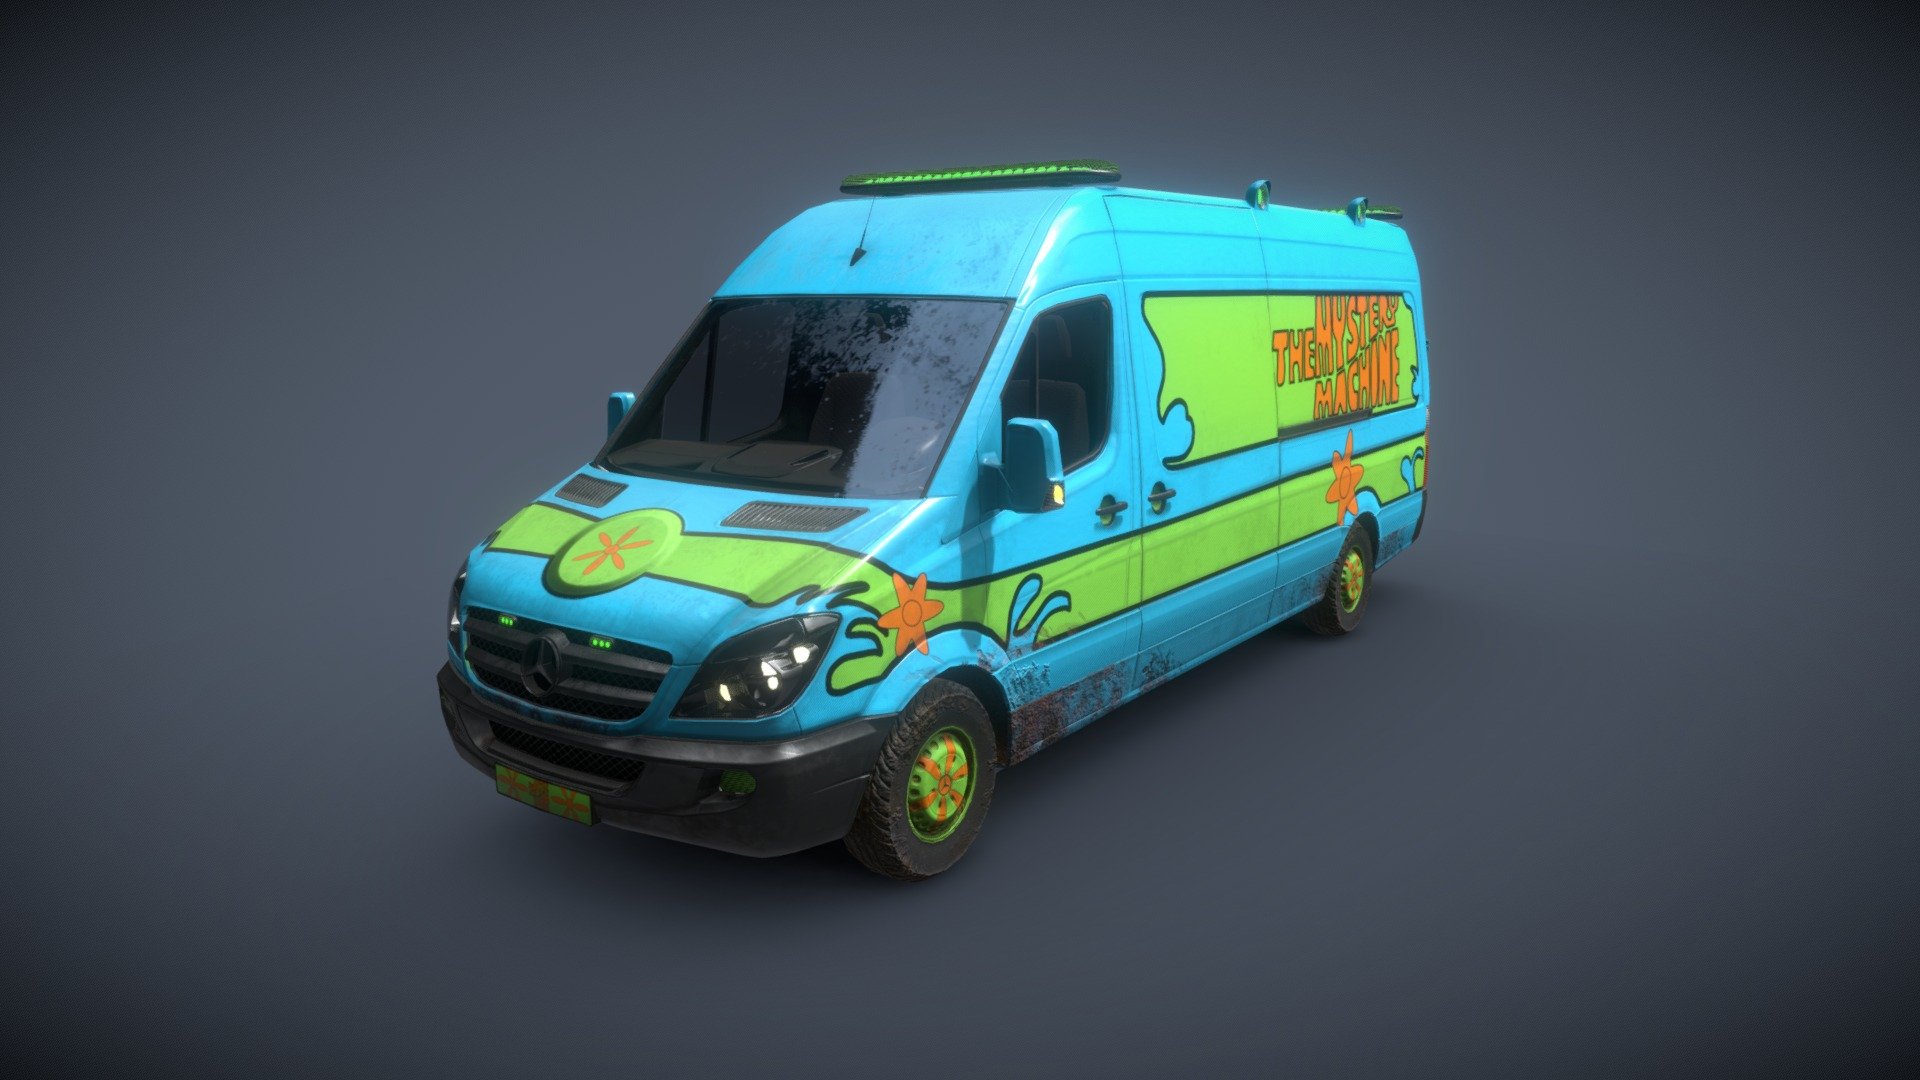 Mercedes Sprinter Scooby-Doo Mystery Machine

Lowpoly: Maya
Texture: Substance Painter - Mercedes Sprinter Scooby-Doo Mystery Machine - 3D model by Maxime Arrotin (@maxime.arrotin) 3d model